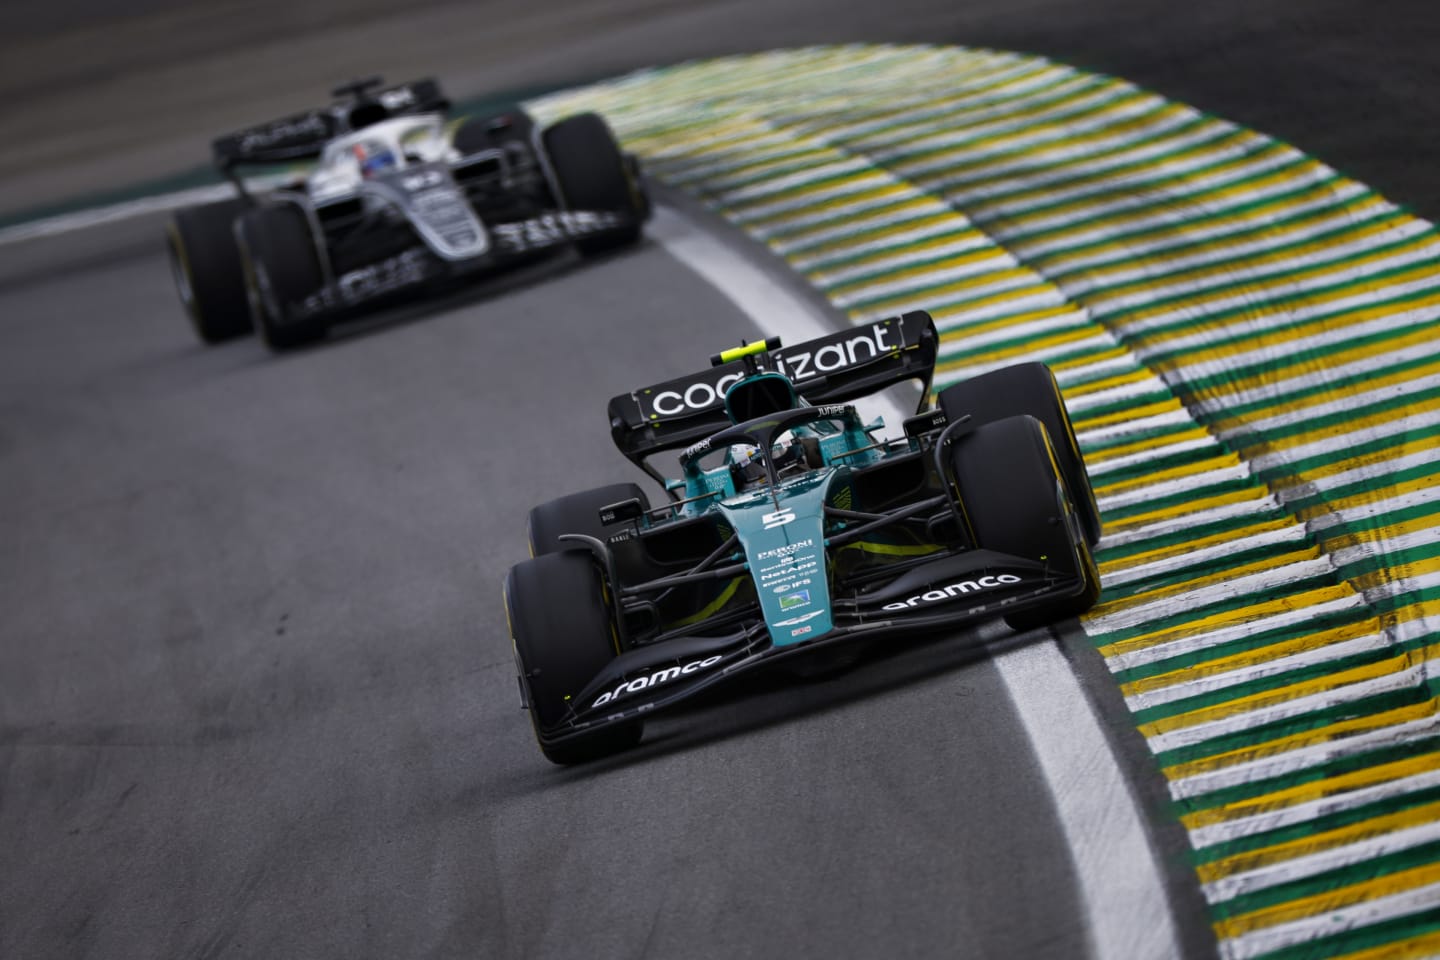 SAO PAULO, BRAZIL - NOVEMBER 13: Sebastian Vettel of Germany driving the (5) Aston Martin AMR22 Mercedes on track during the F1 Grand Prix of Brazil at Autodromo Jose Carlos Pace on November 13, 2022 in Sao Paulo, Brazil. (Photo by Jared C. Tilton/Getty Images)